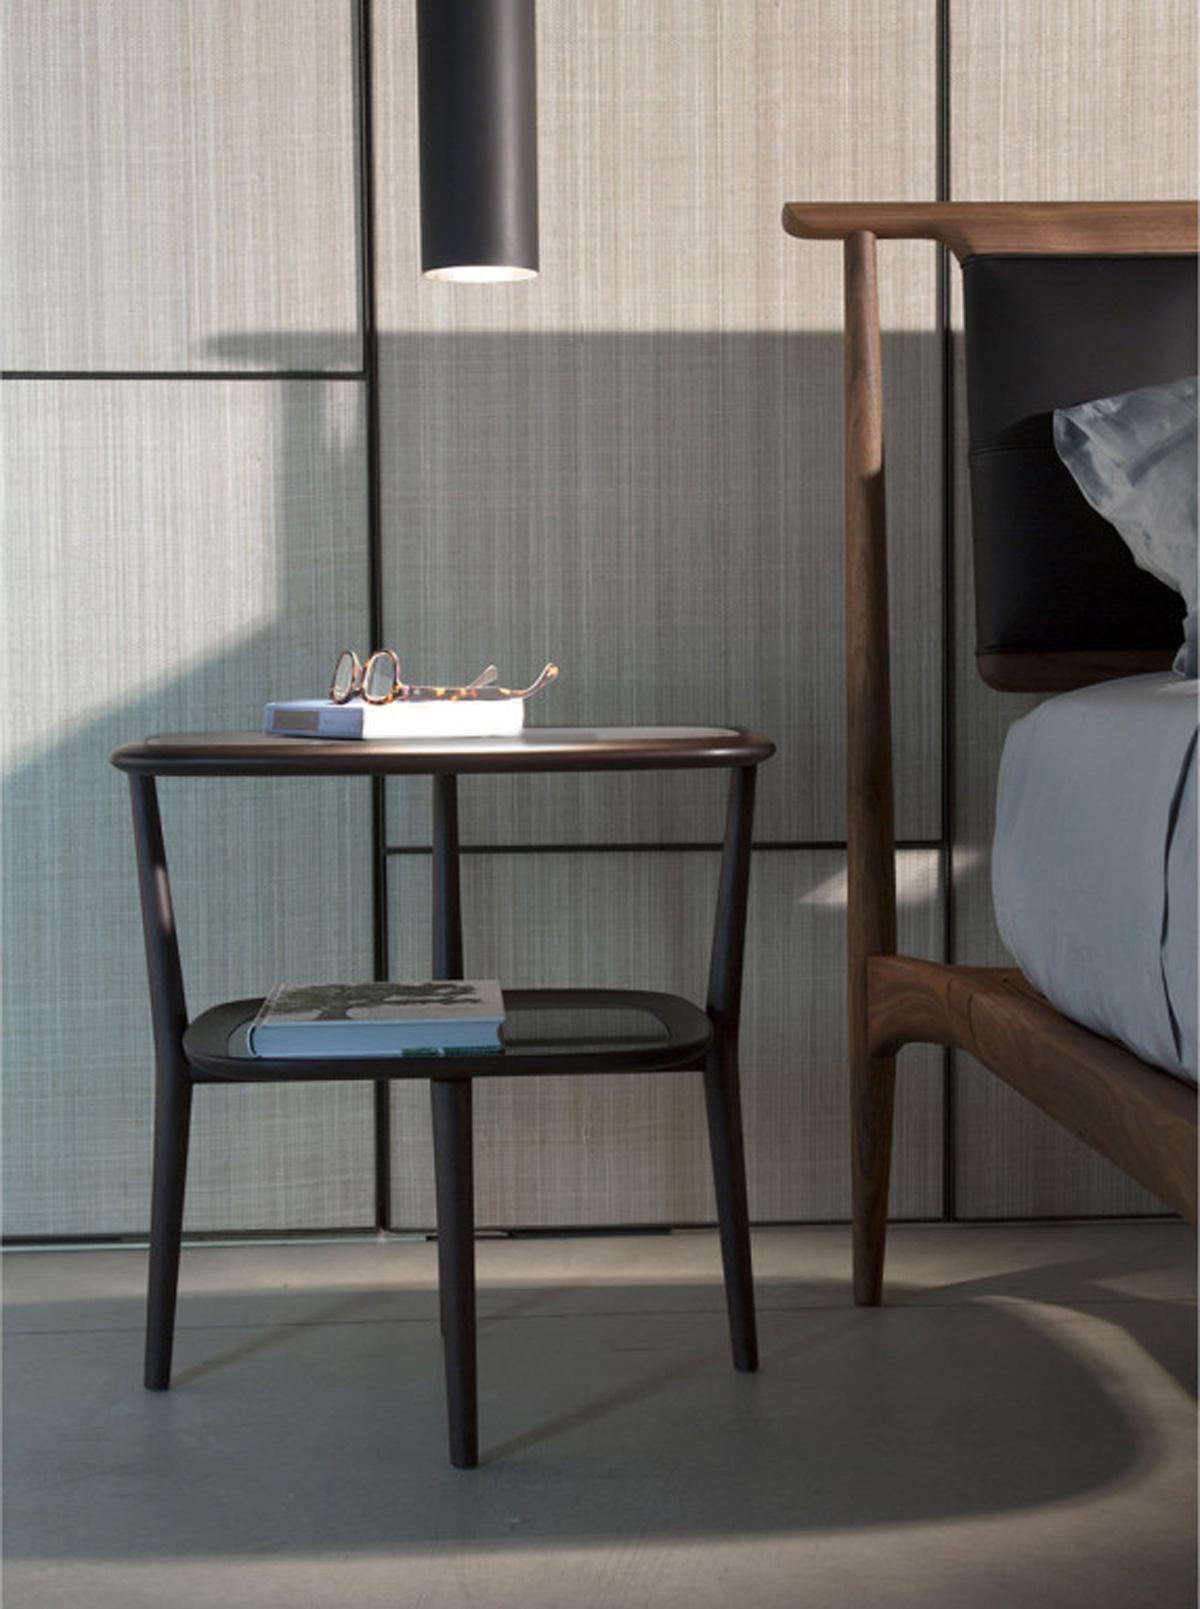 Whether it is used as a side table or a nightstand, Petit Matin carries out its functional duties with elegance and creates a focal point in the living room or bedroom. Versatile and functional, its structure is made from solid American walnut. The